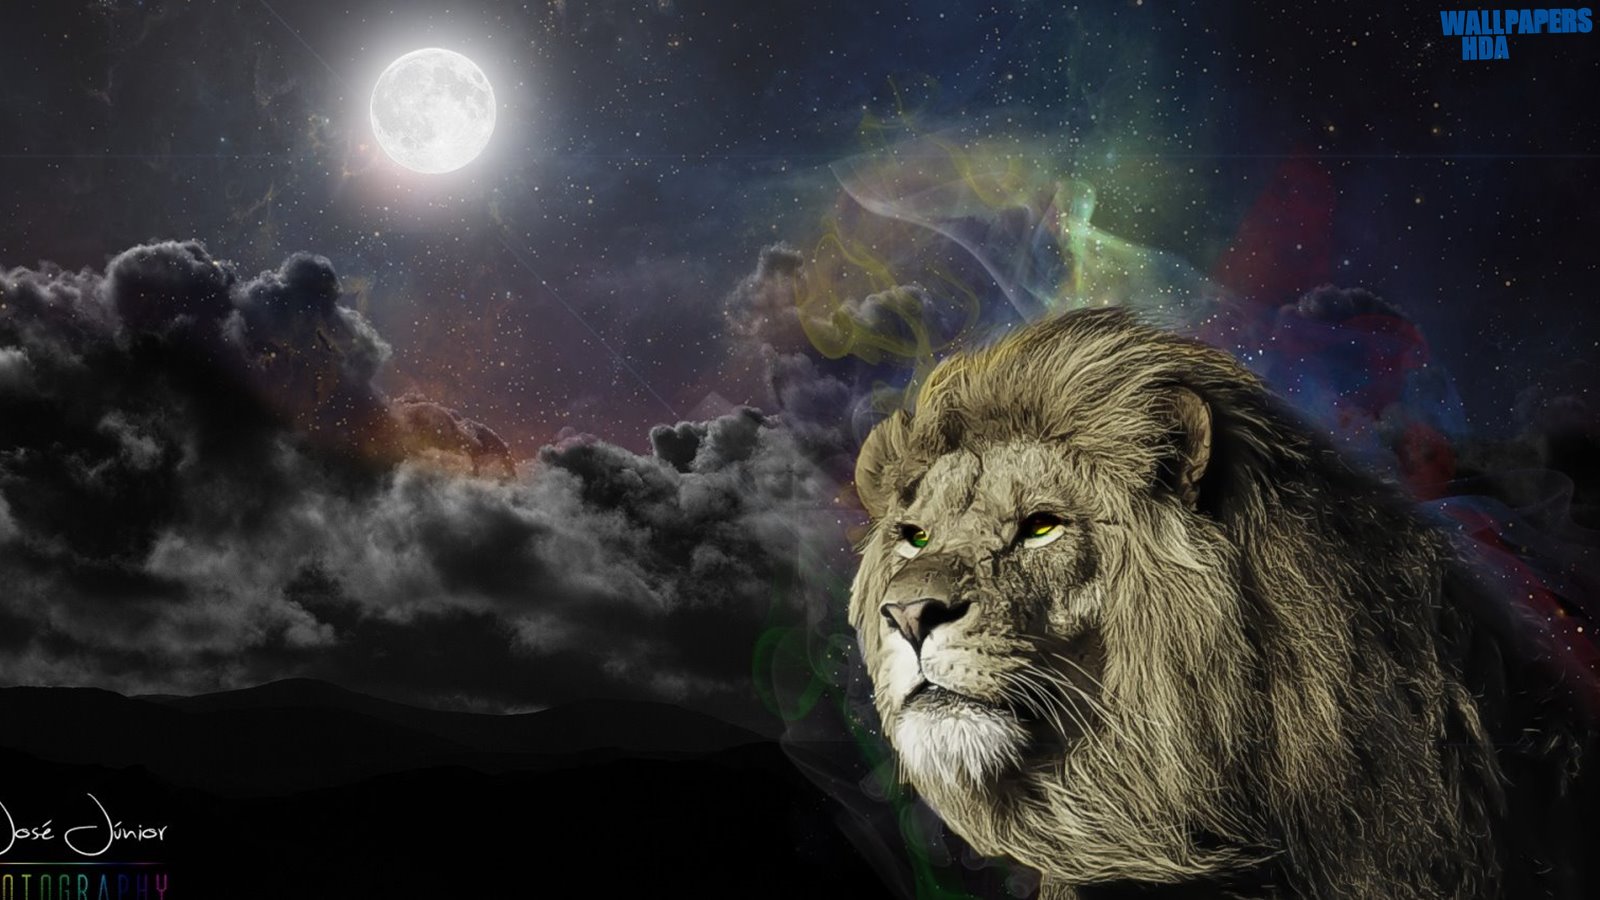 The great lion wallpaper 1600x900